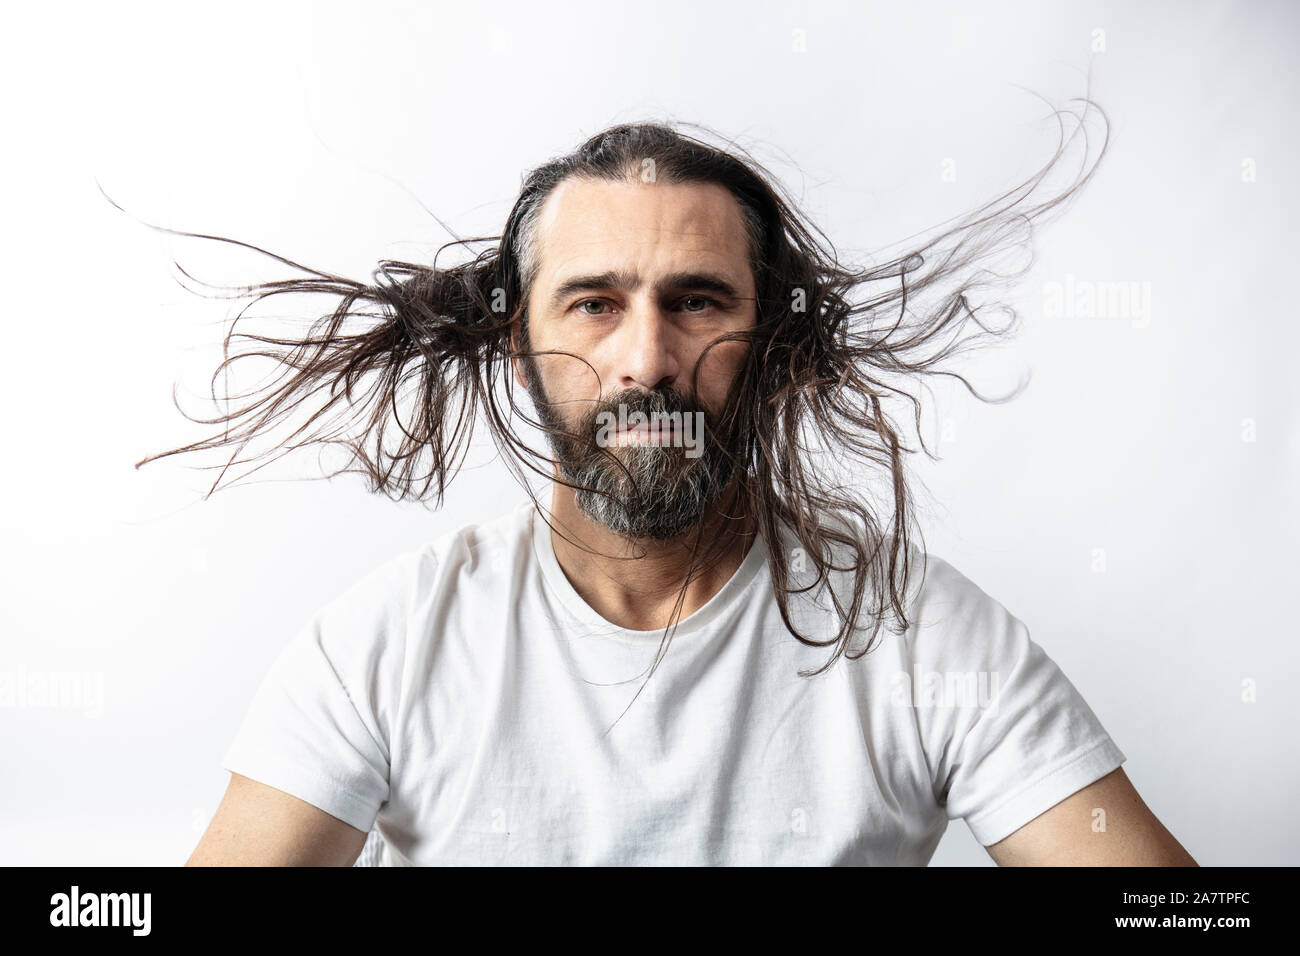 portrait of a caucasian man with beard and fluttering long hair. Serene expression and look at the camera. Stock Photo